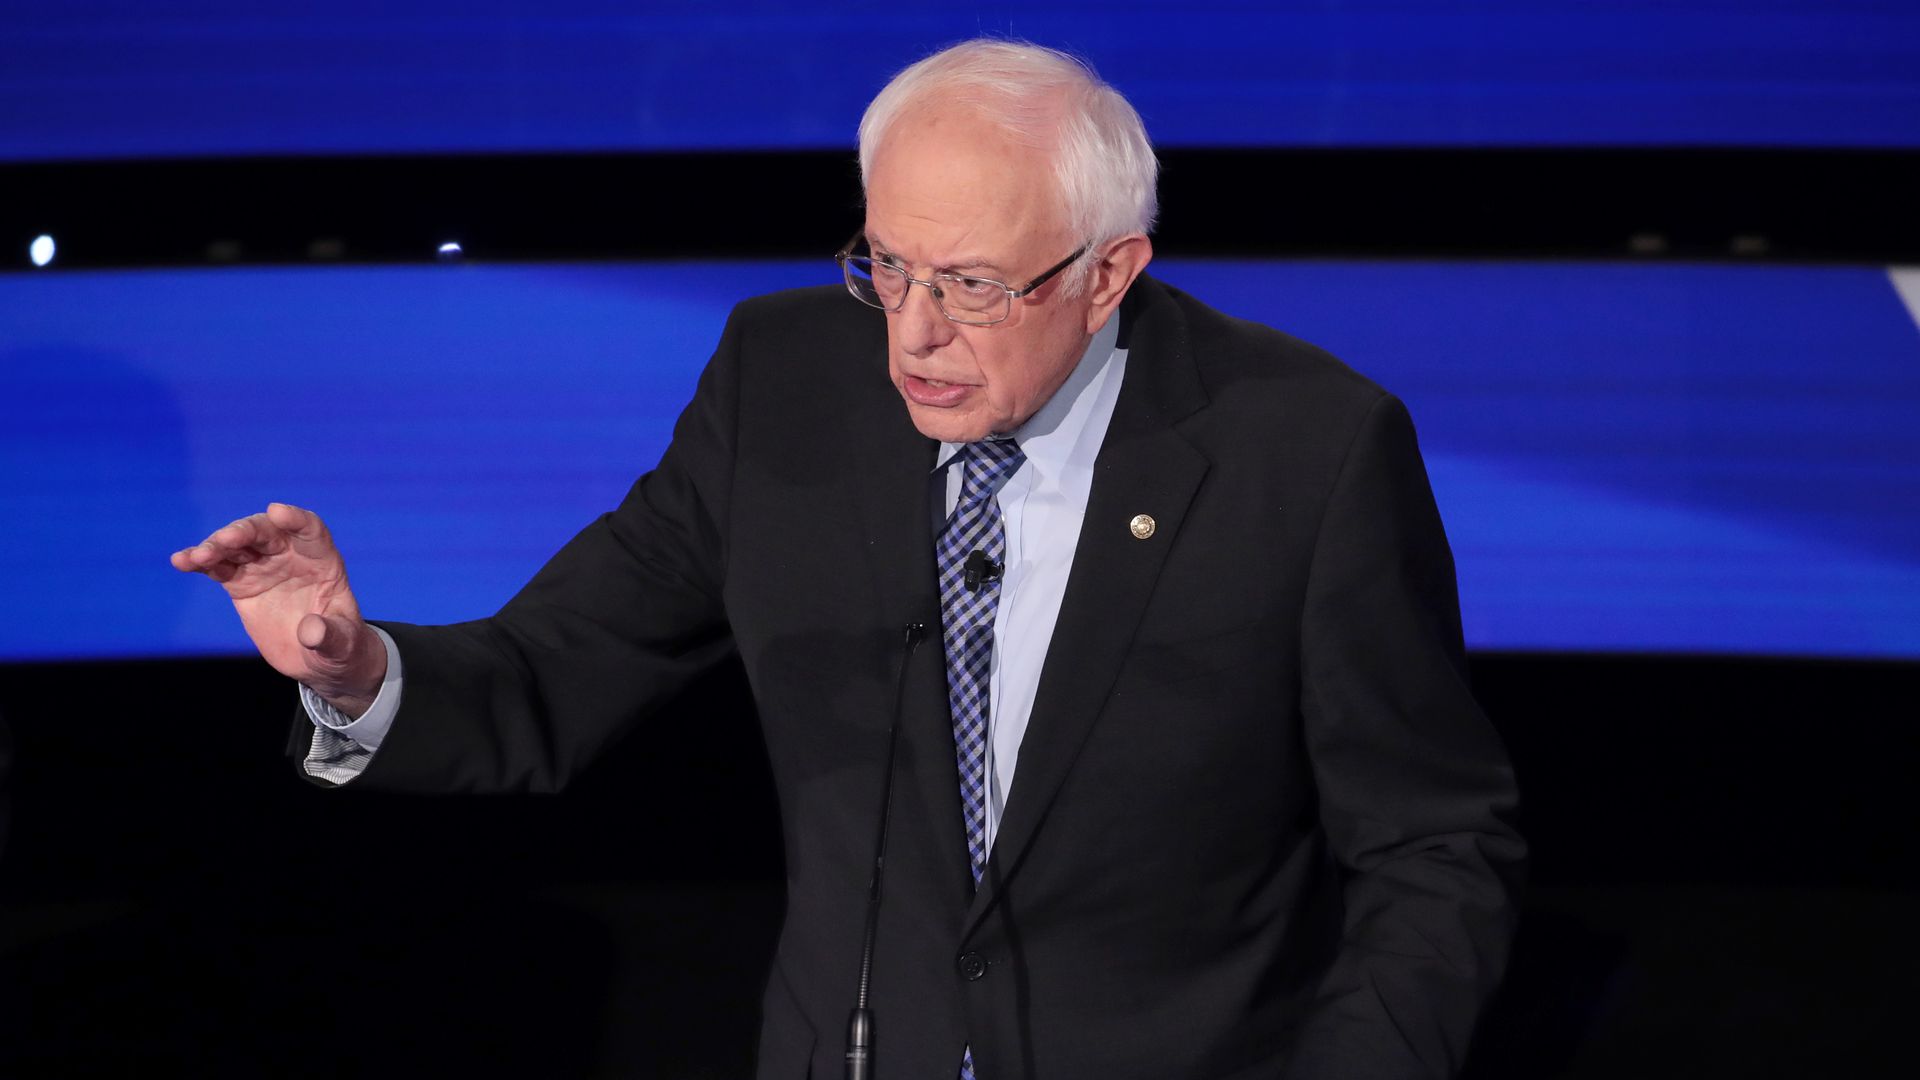  Sen. Bernie Sanders (I-VT) makes a point during the Democratic presidential primary debate at Drake University on January 14, 2020 in Des Moines, Iowa. 